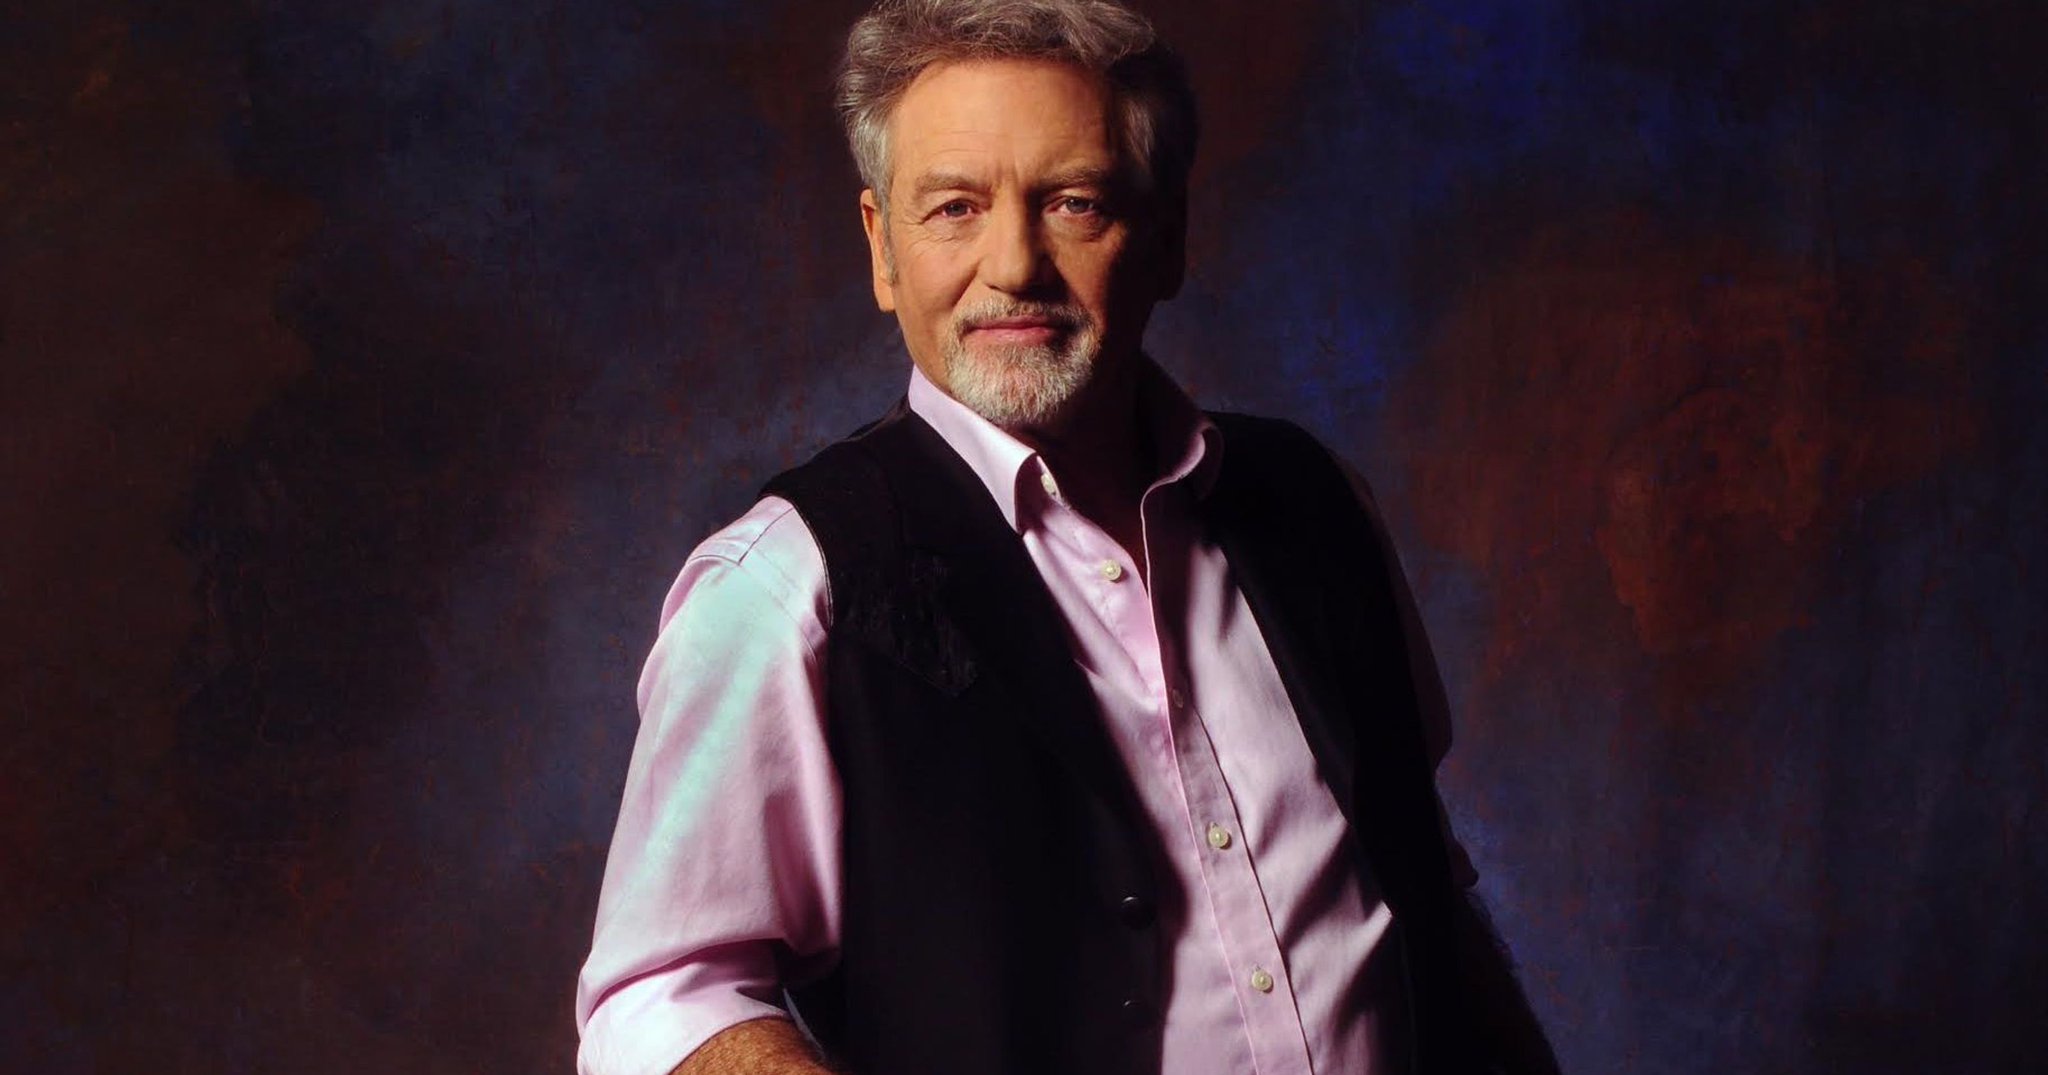 Wishing Larry Gatlin a very HAPPY BIRTHDAY! Born on this date in 1948! 